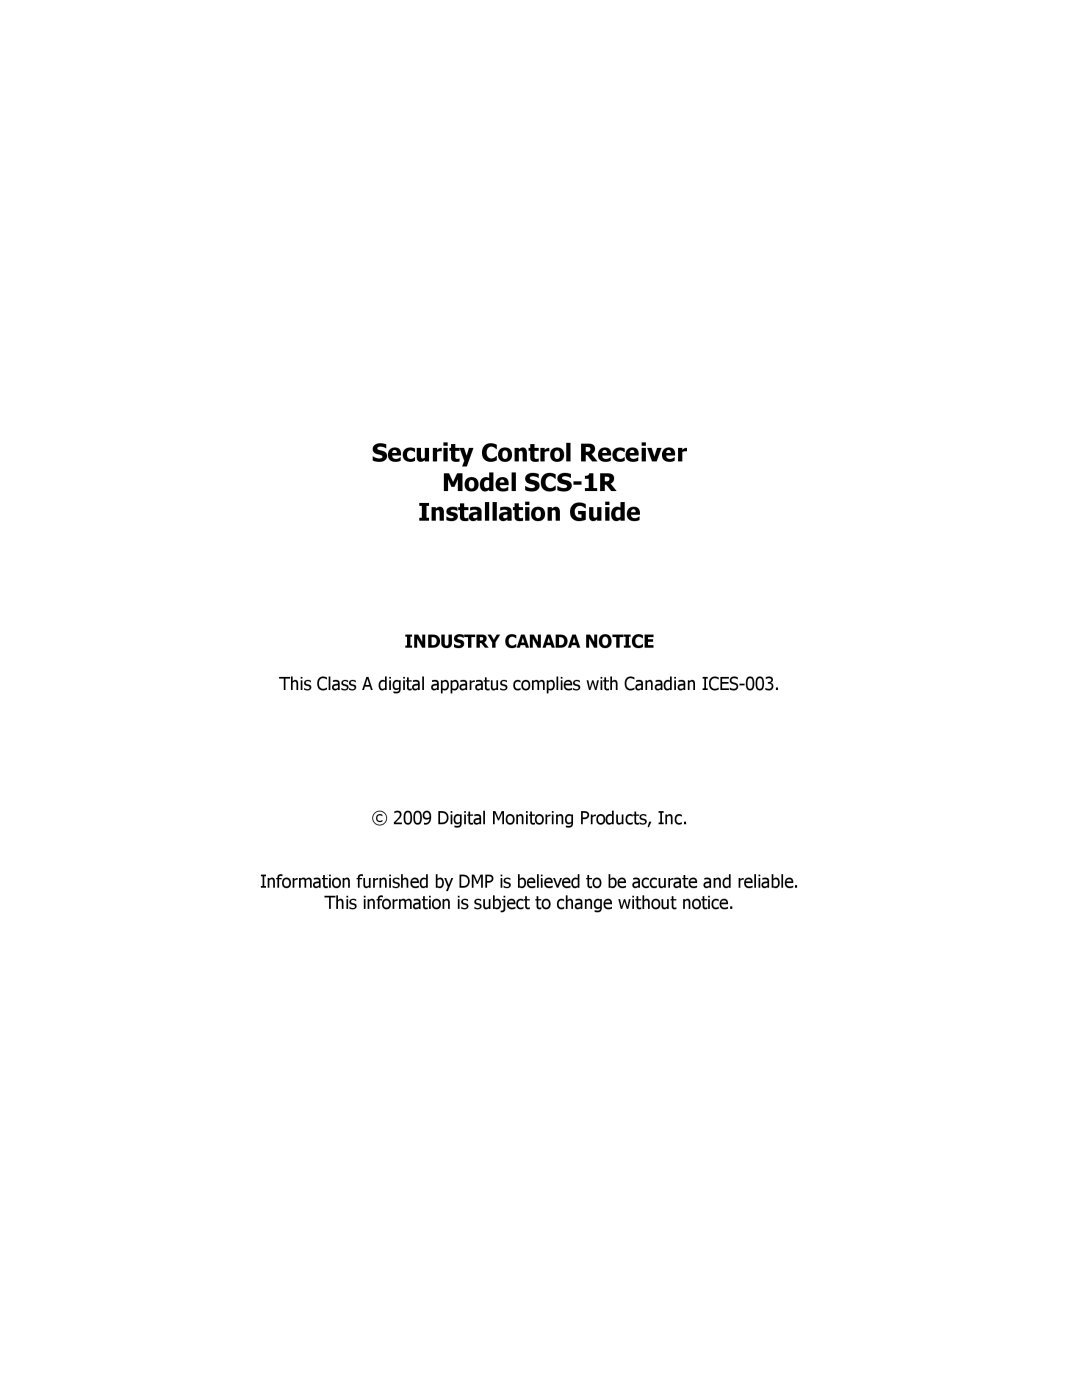 DMP Electronics manual Security Control Receiver Model SCS-1R, Installation Guide, Industry Canada Notice 